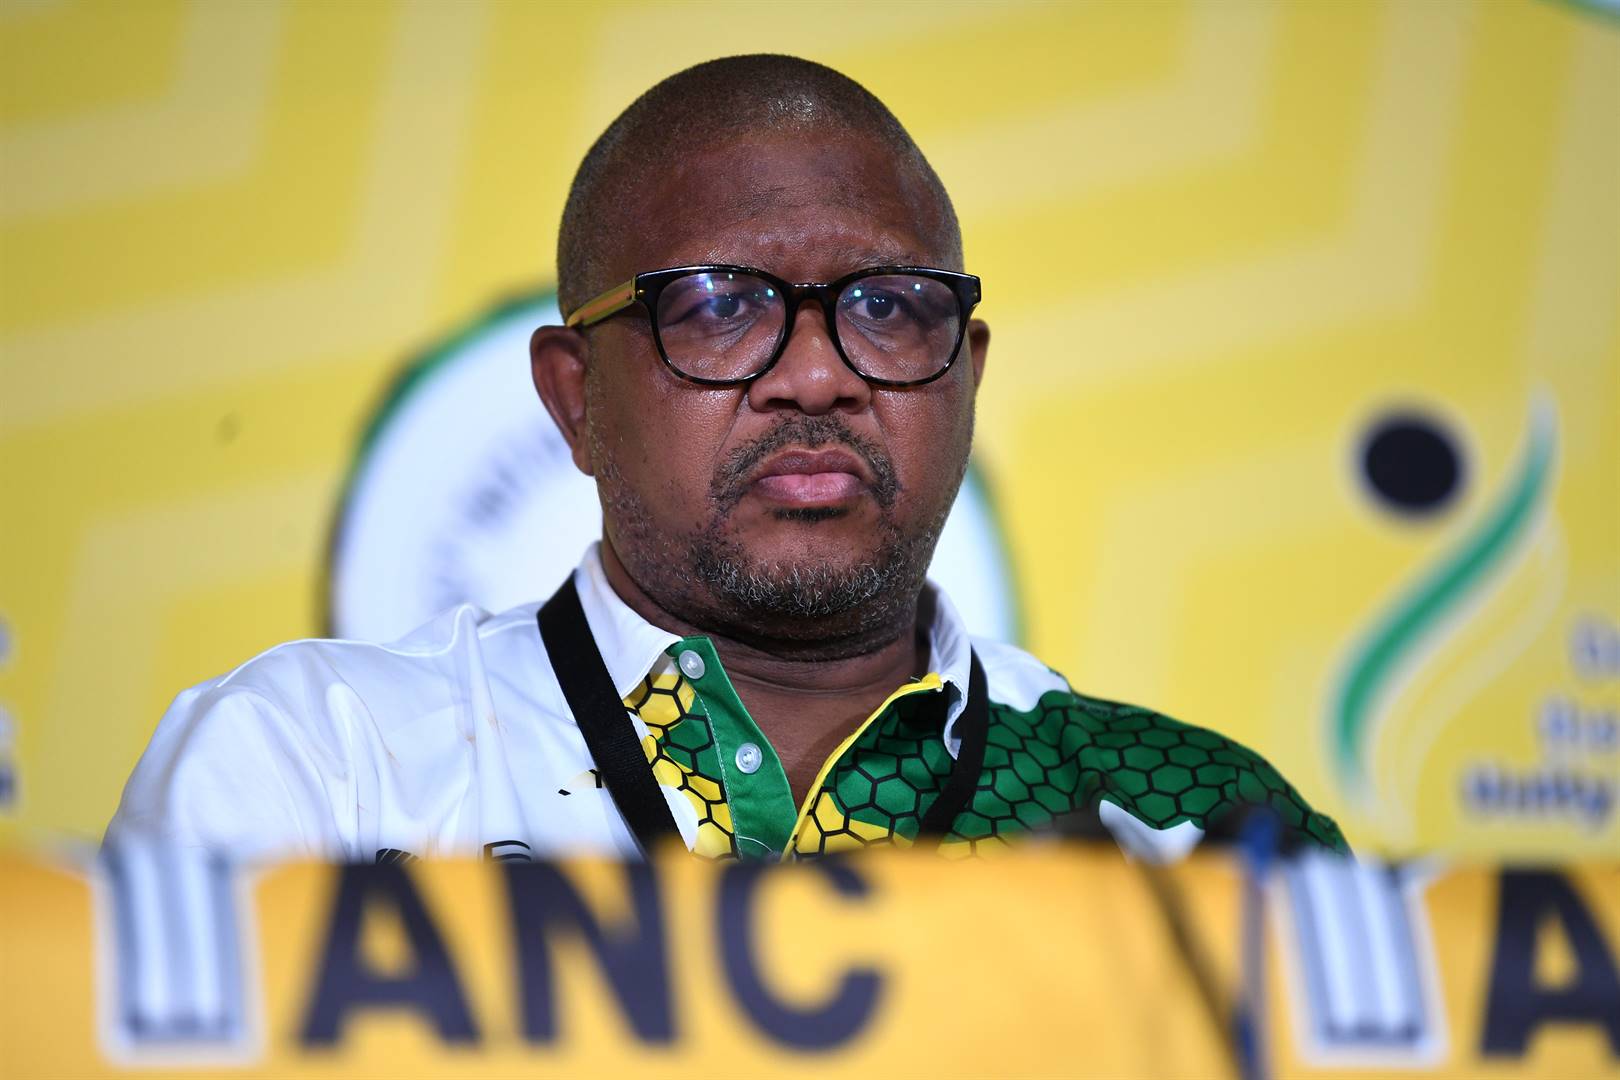 News24 | EXCLUSIVE | DA wants Mbalula jailed for contempt of court over cadre deployment records